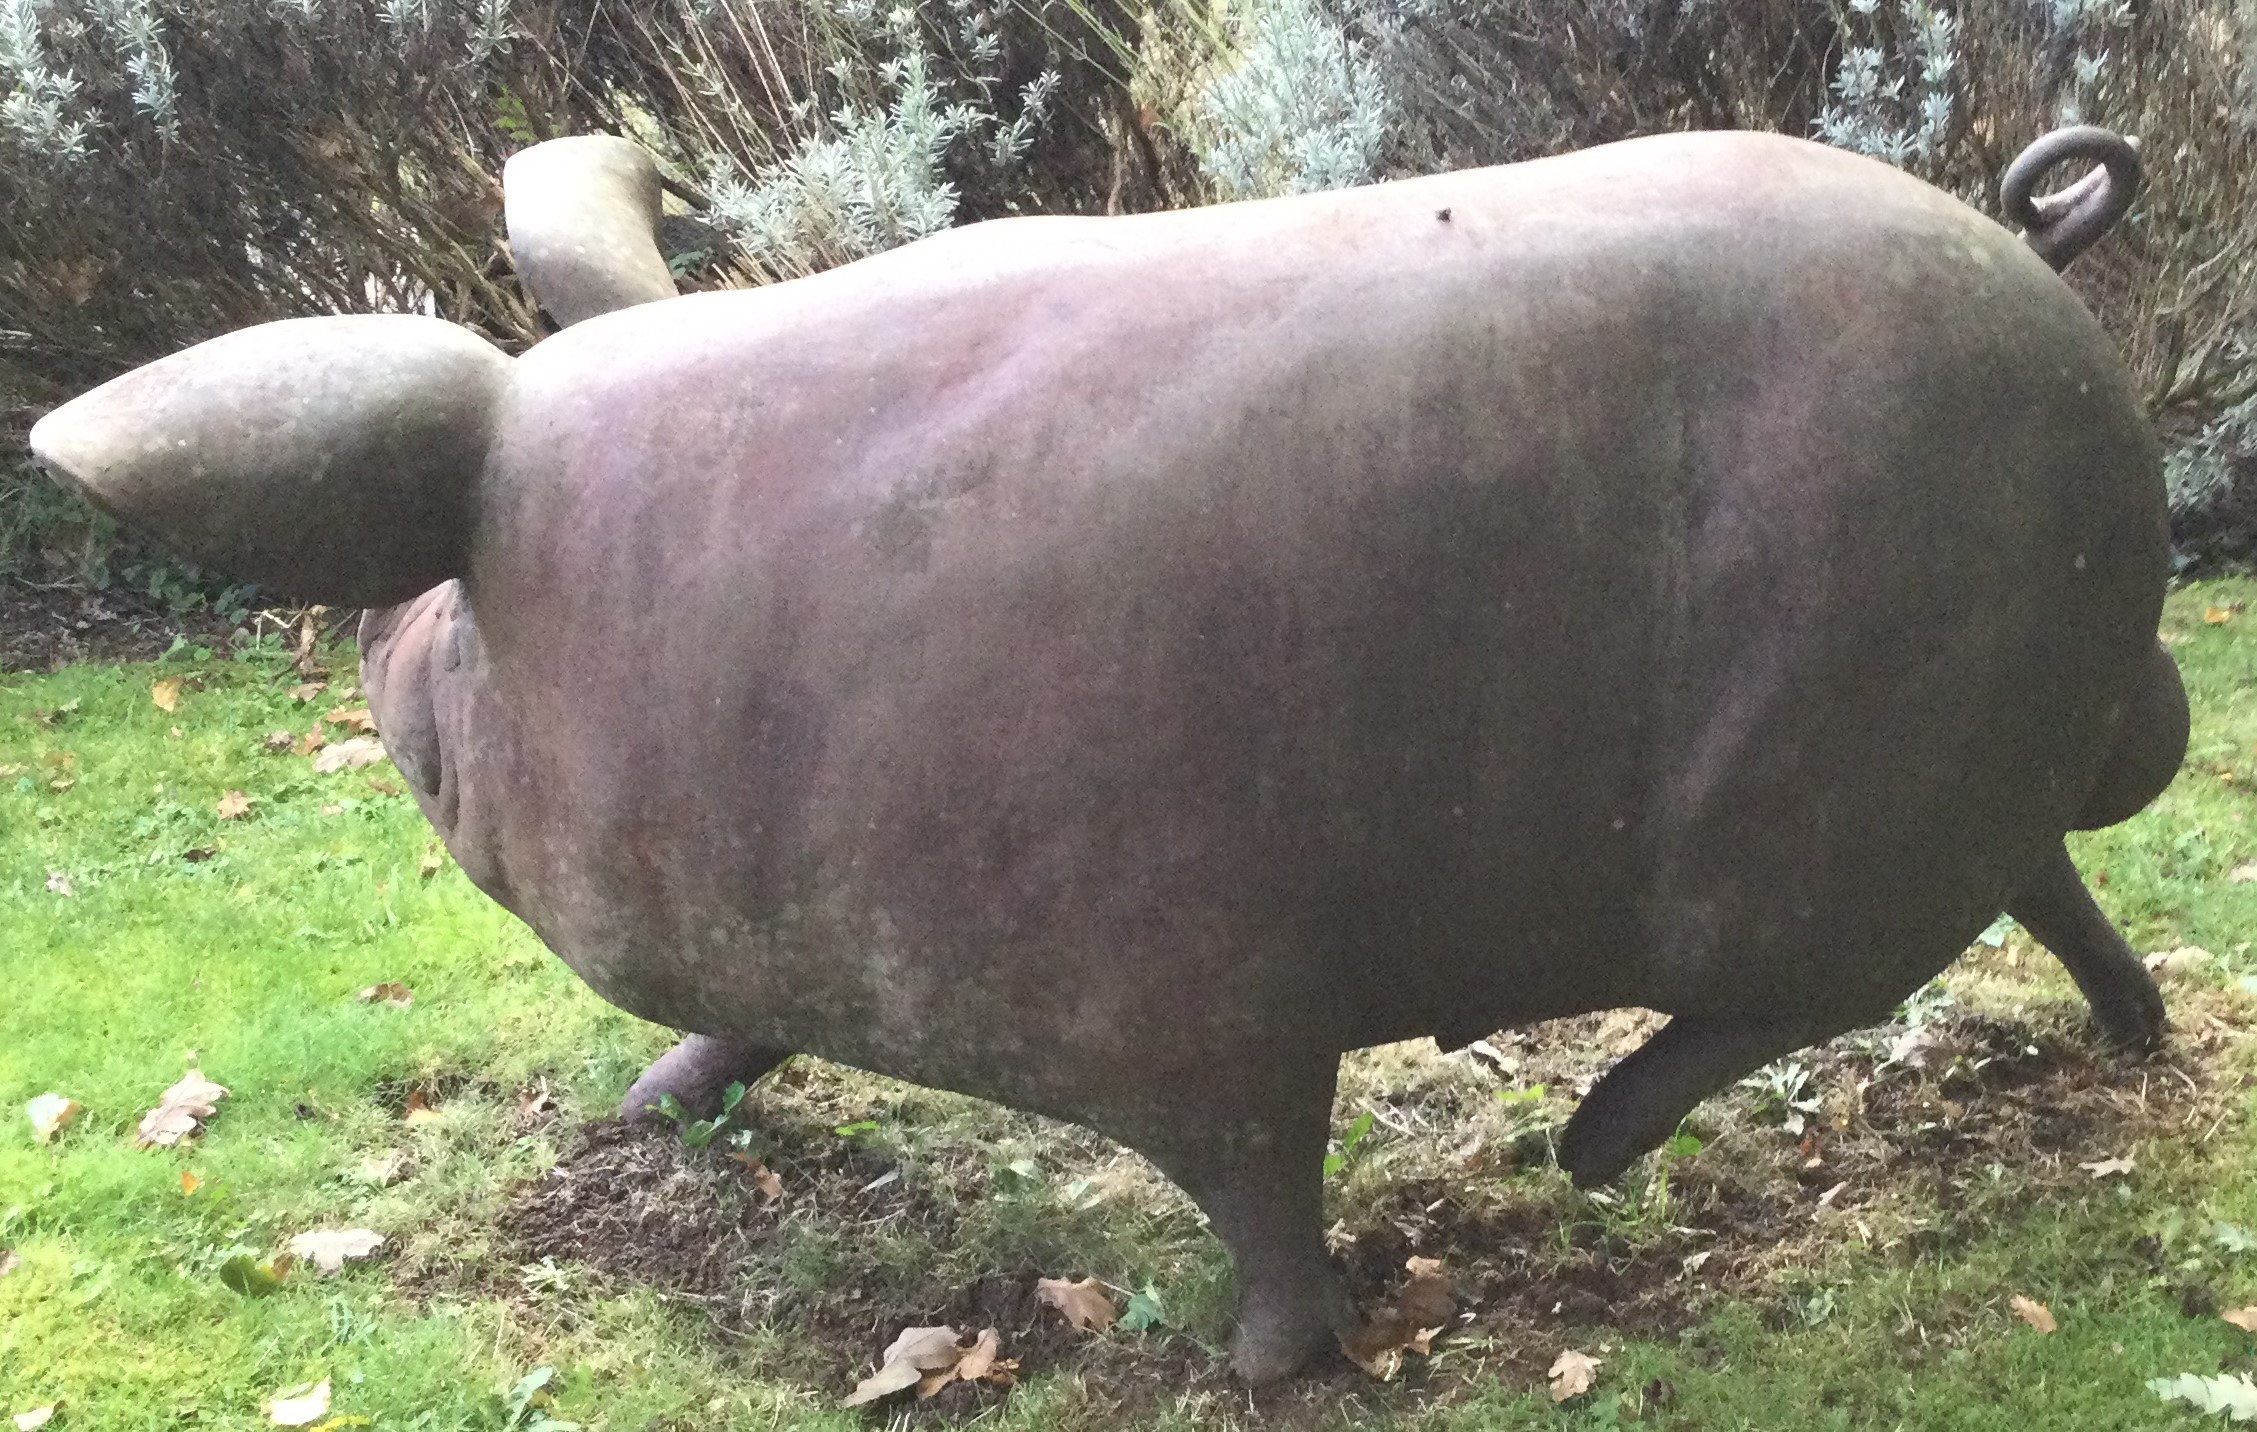 A massive garden ornament in the form of a pig with outstretched ears. - Image 3 of 3